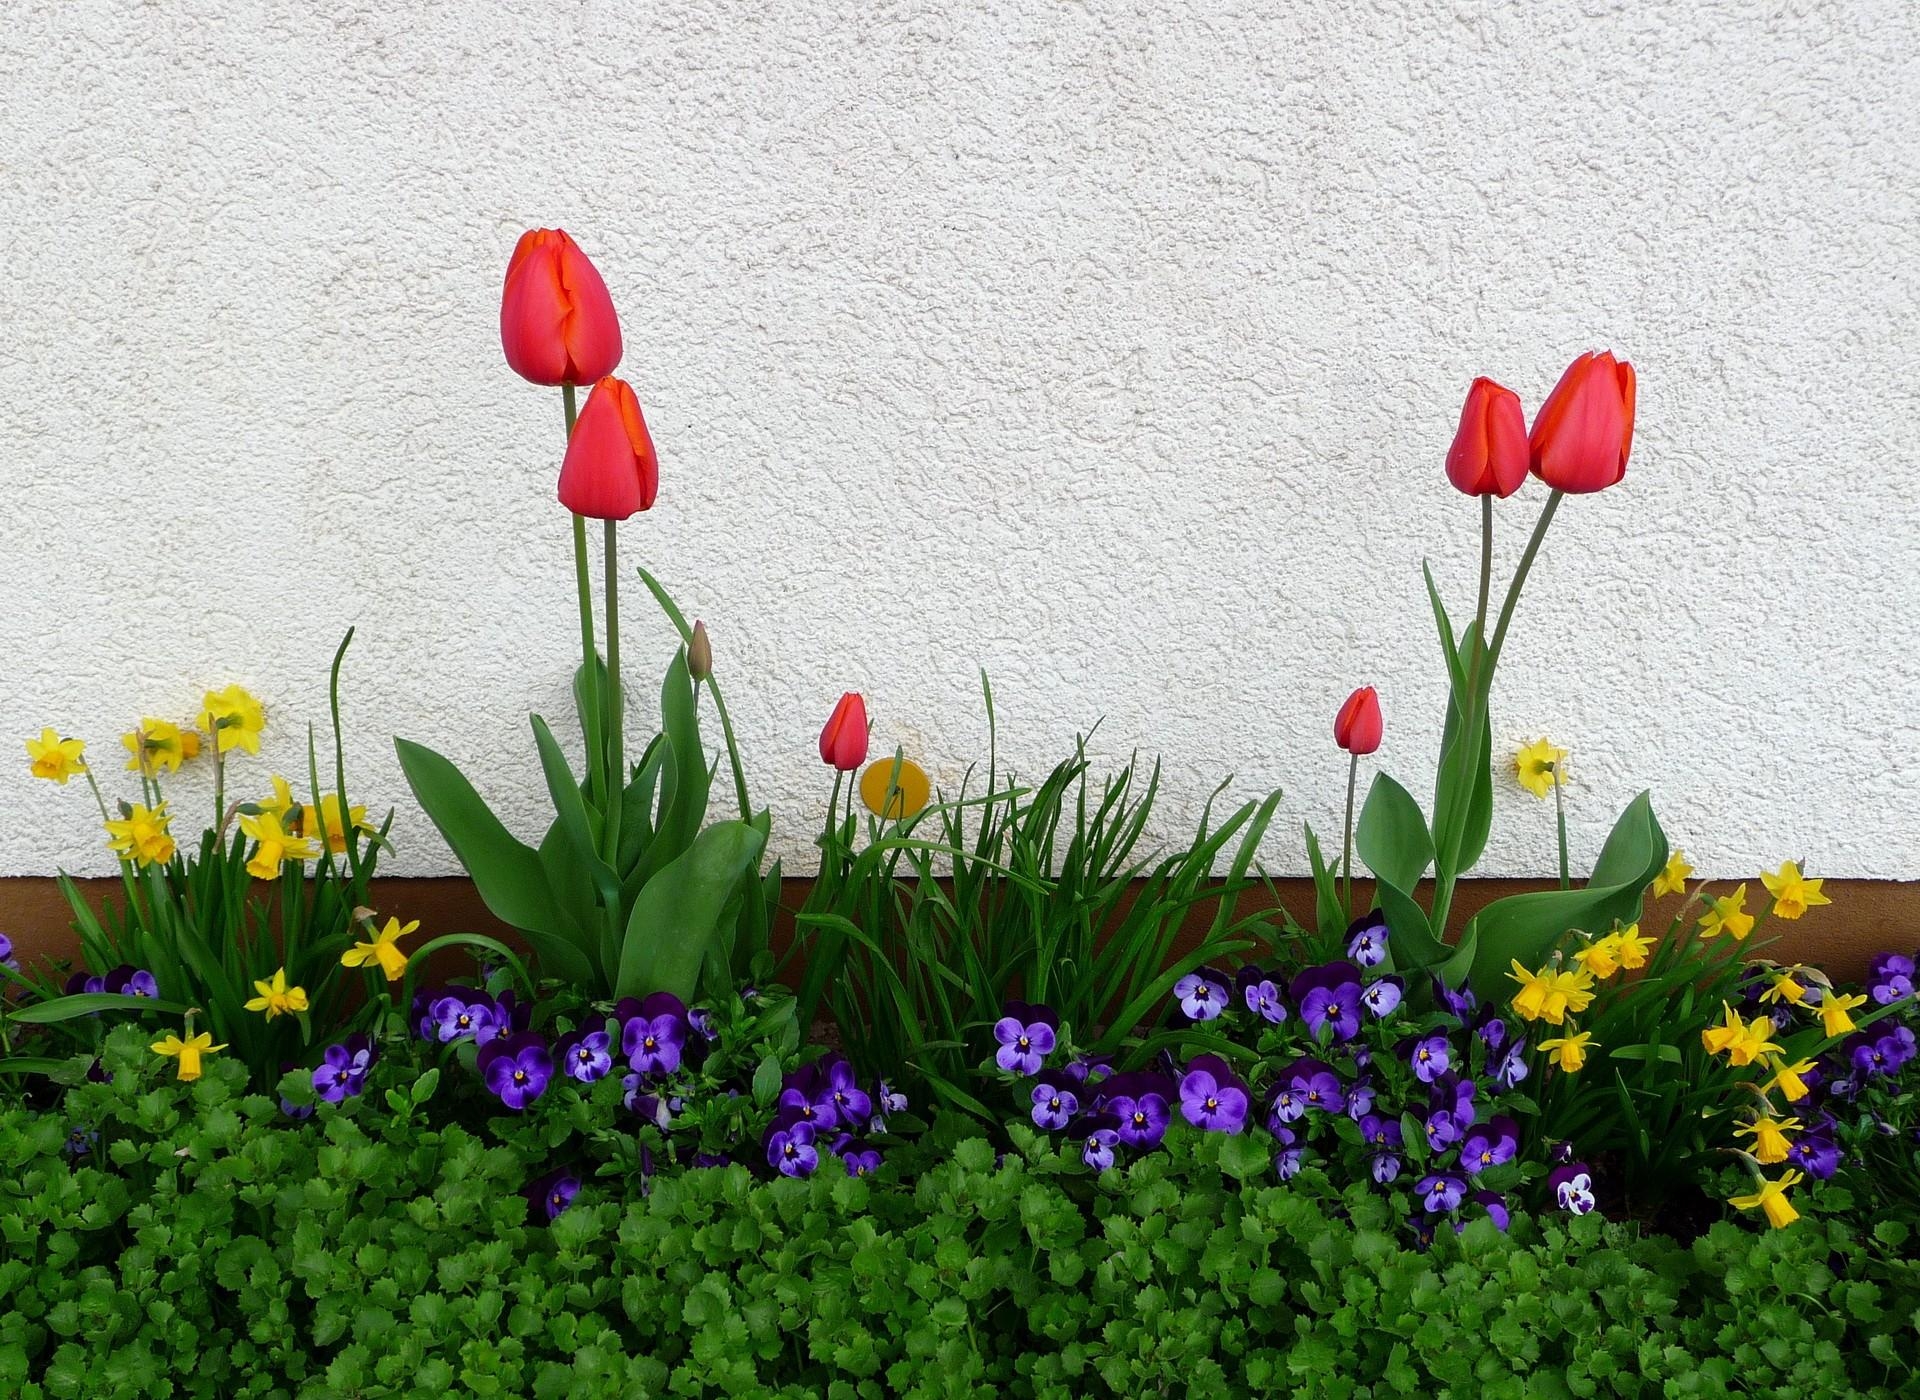 Download PC Wallpaper tulips, flowers, pansies, narcissussi, greens, flower bed, flowerbed, wall, spring